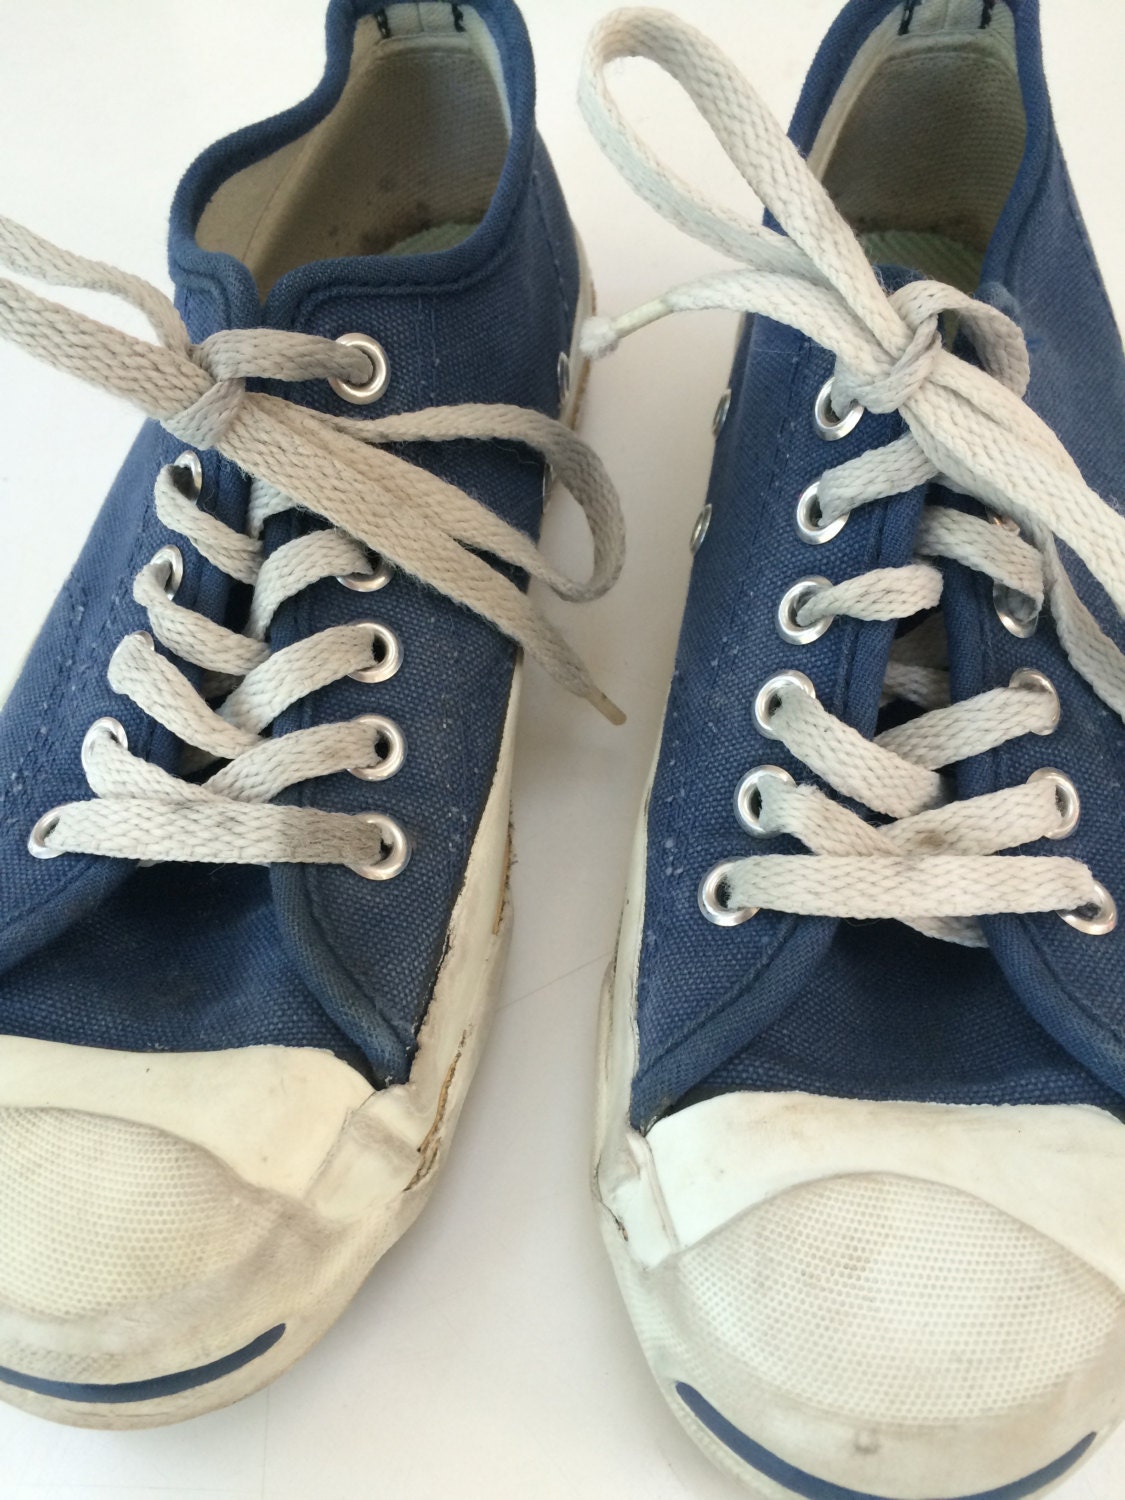 Converse Jack Purcell USA 60's blue tennis shoes by mightyMODERN